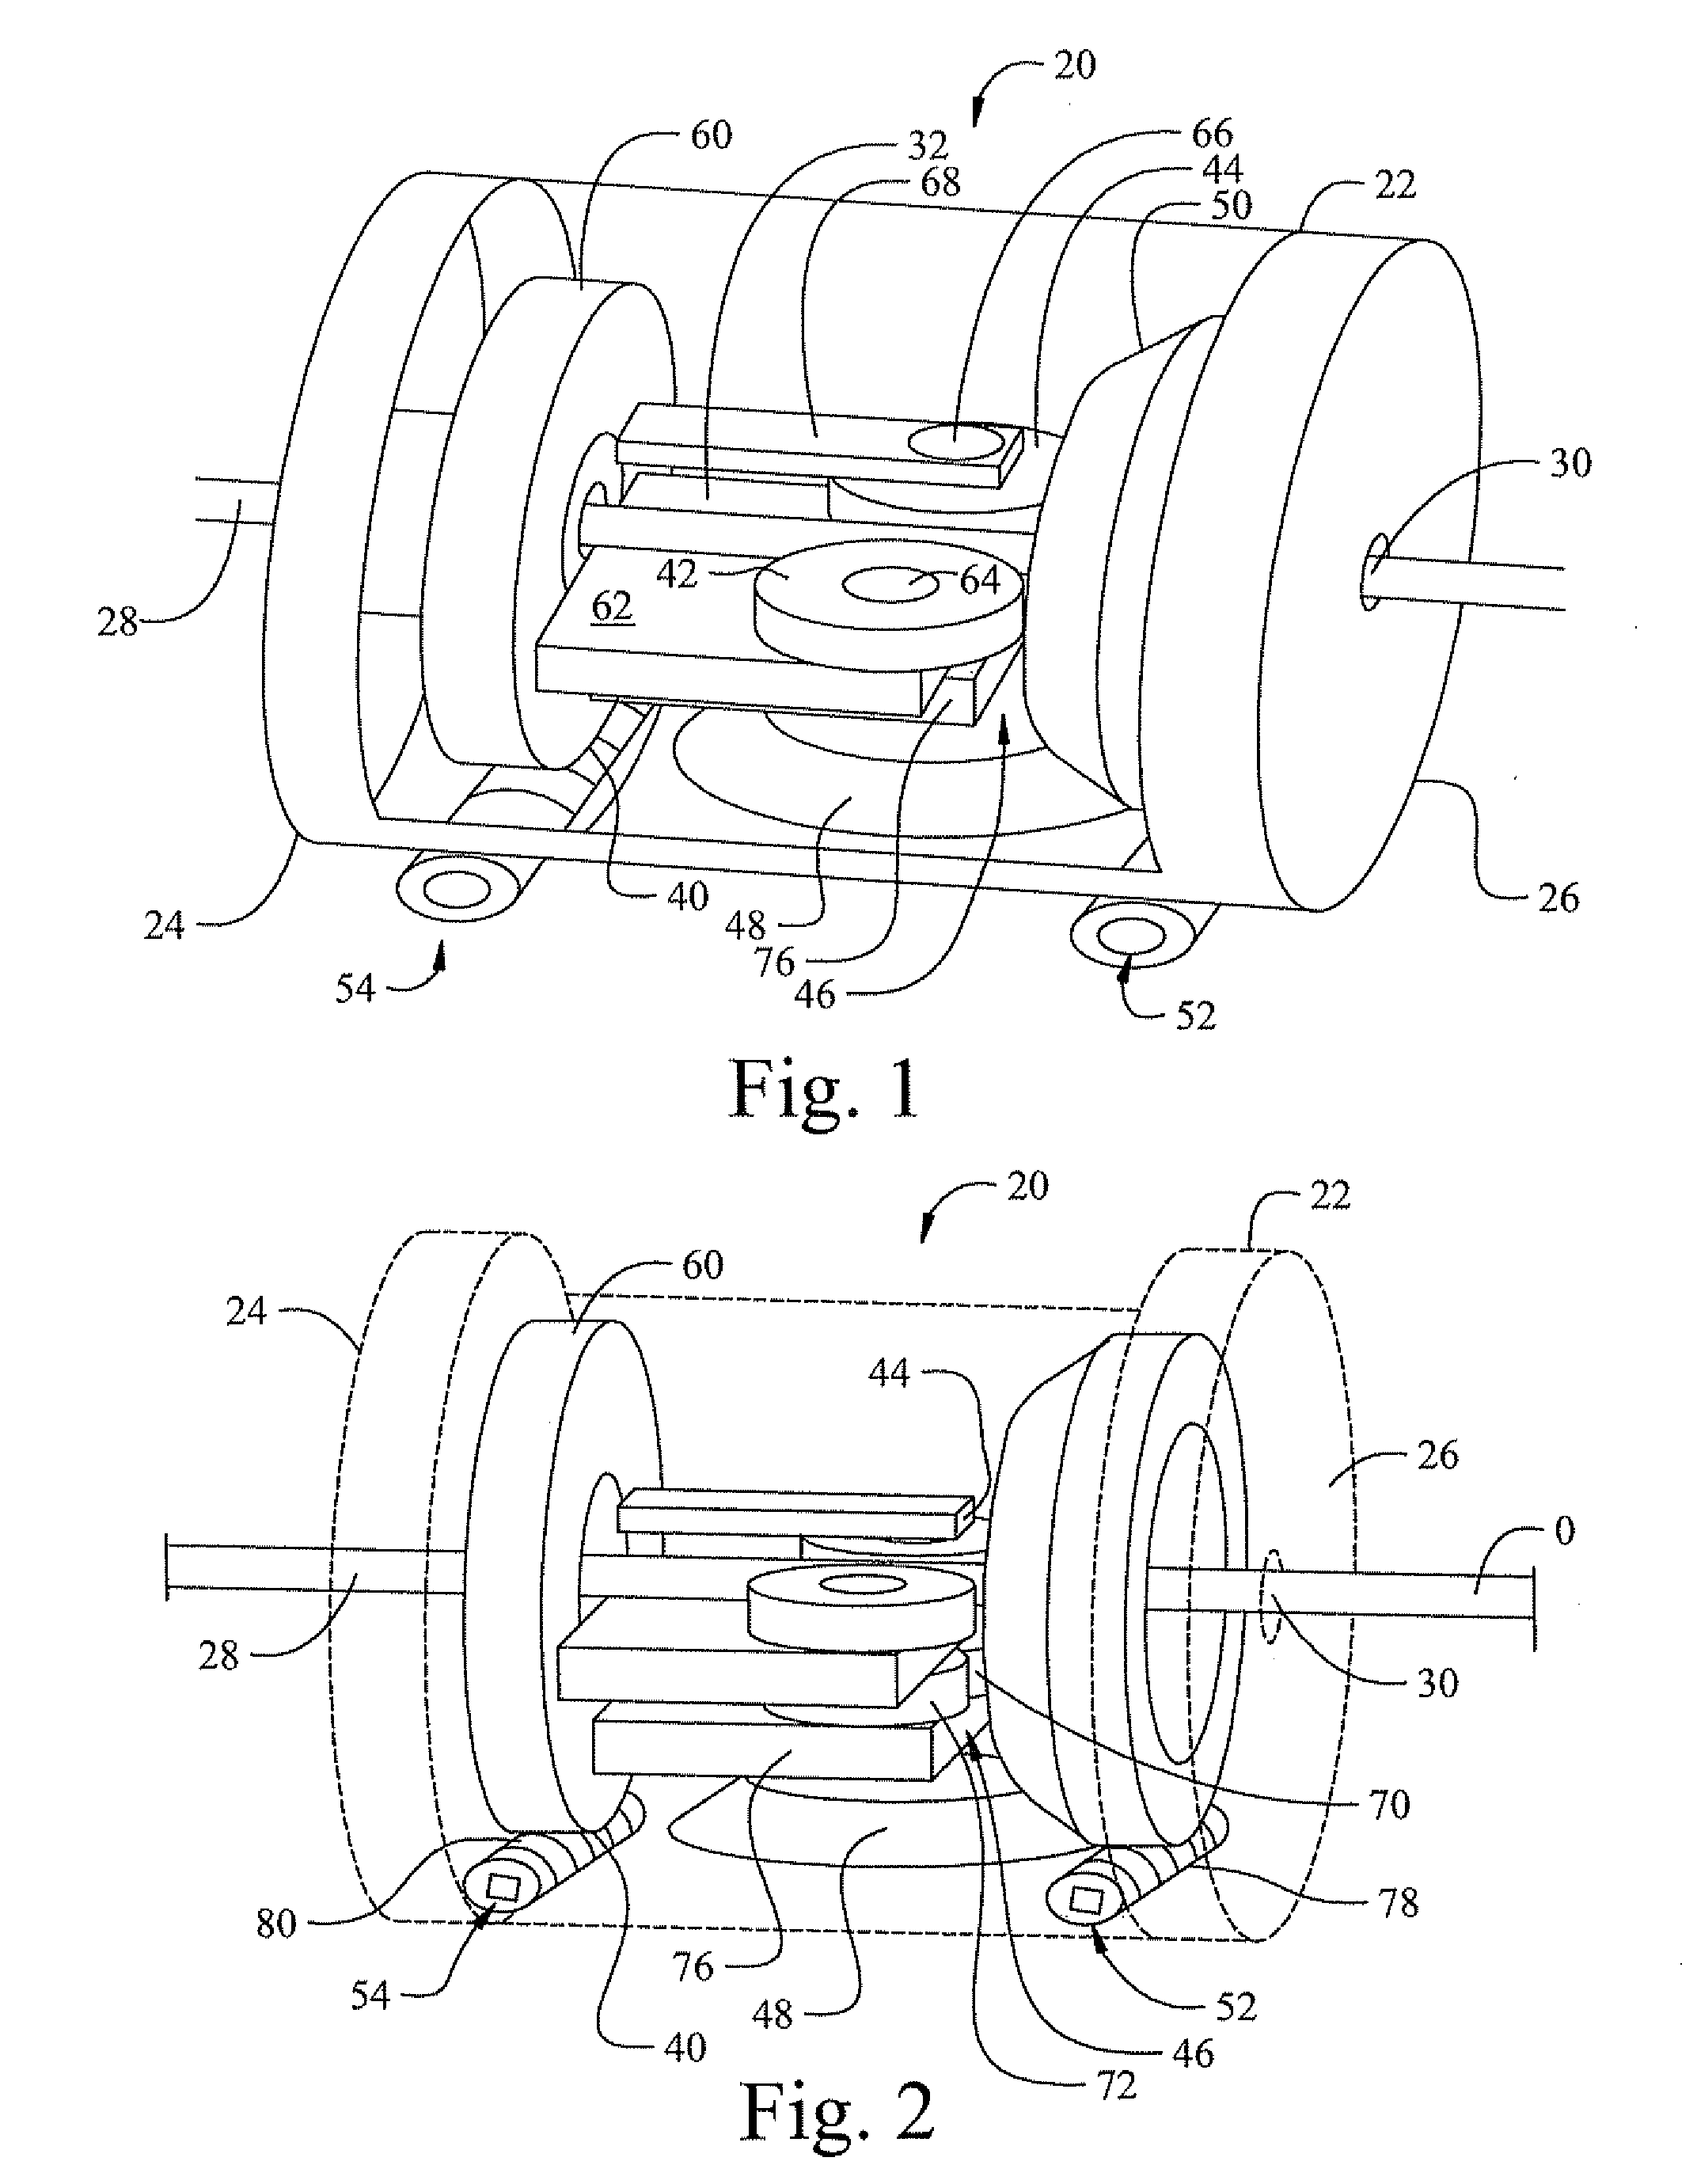 Apparatus for selectively rotating and/or advancing an elongate device